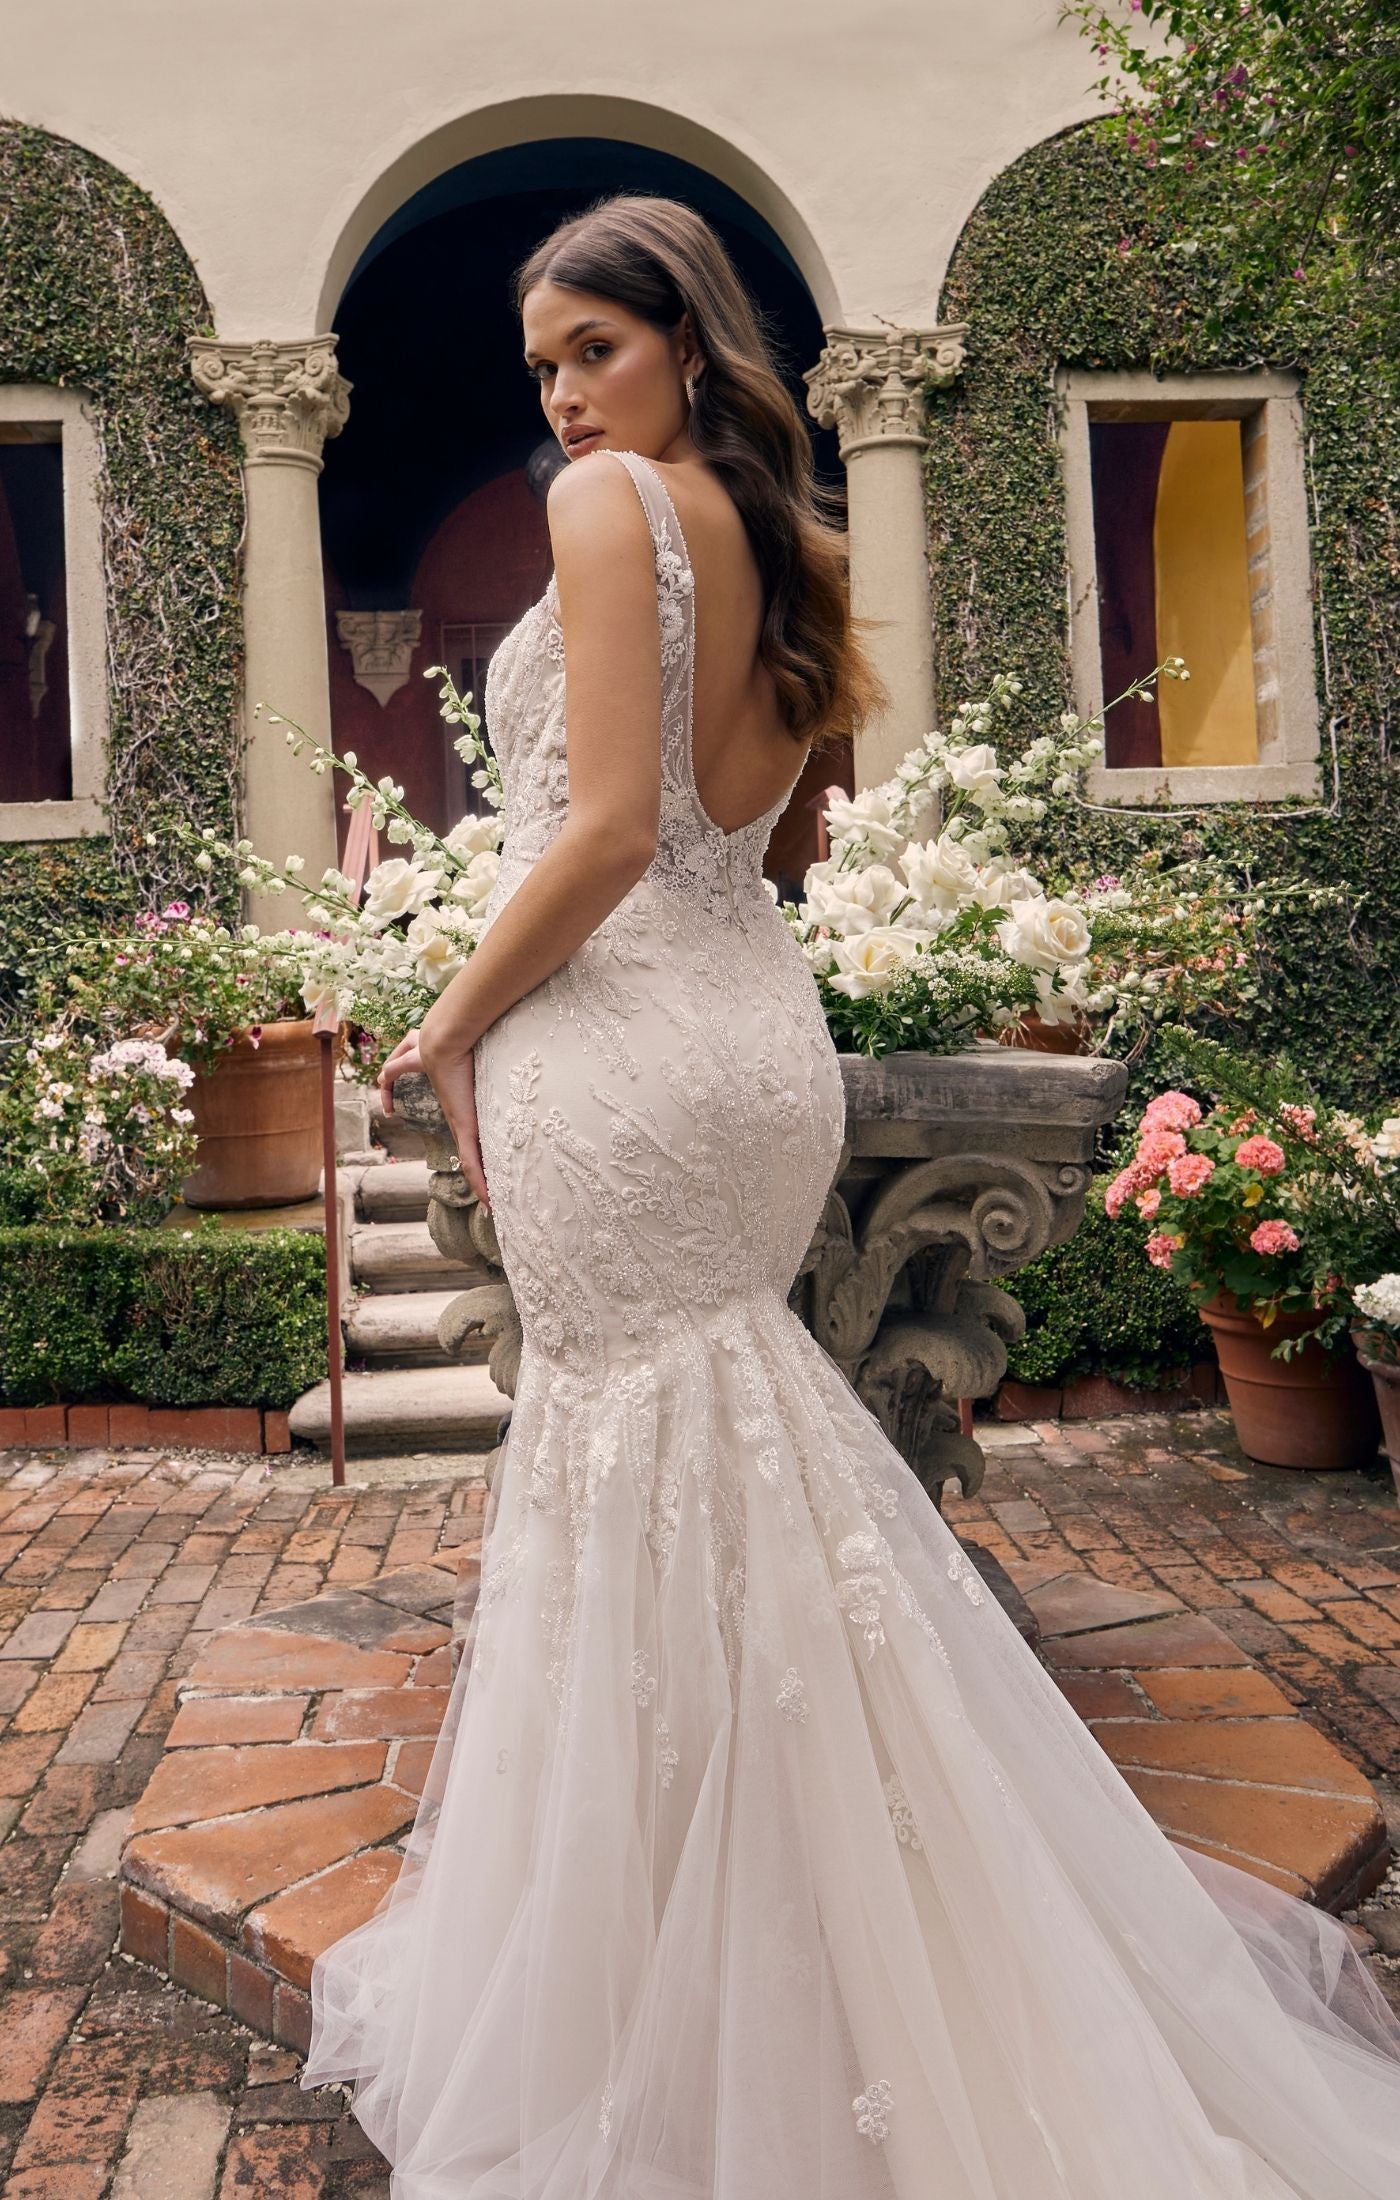 Beaded Lace Wedding Dress in Fit and Flare Shape With Sweetheart Neckline Wedding  Dress With Straps and V Cut Back, Diamond Neck Dress 